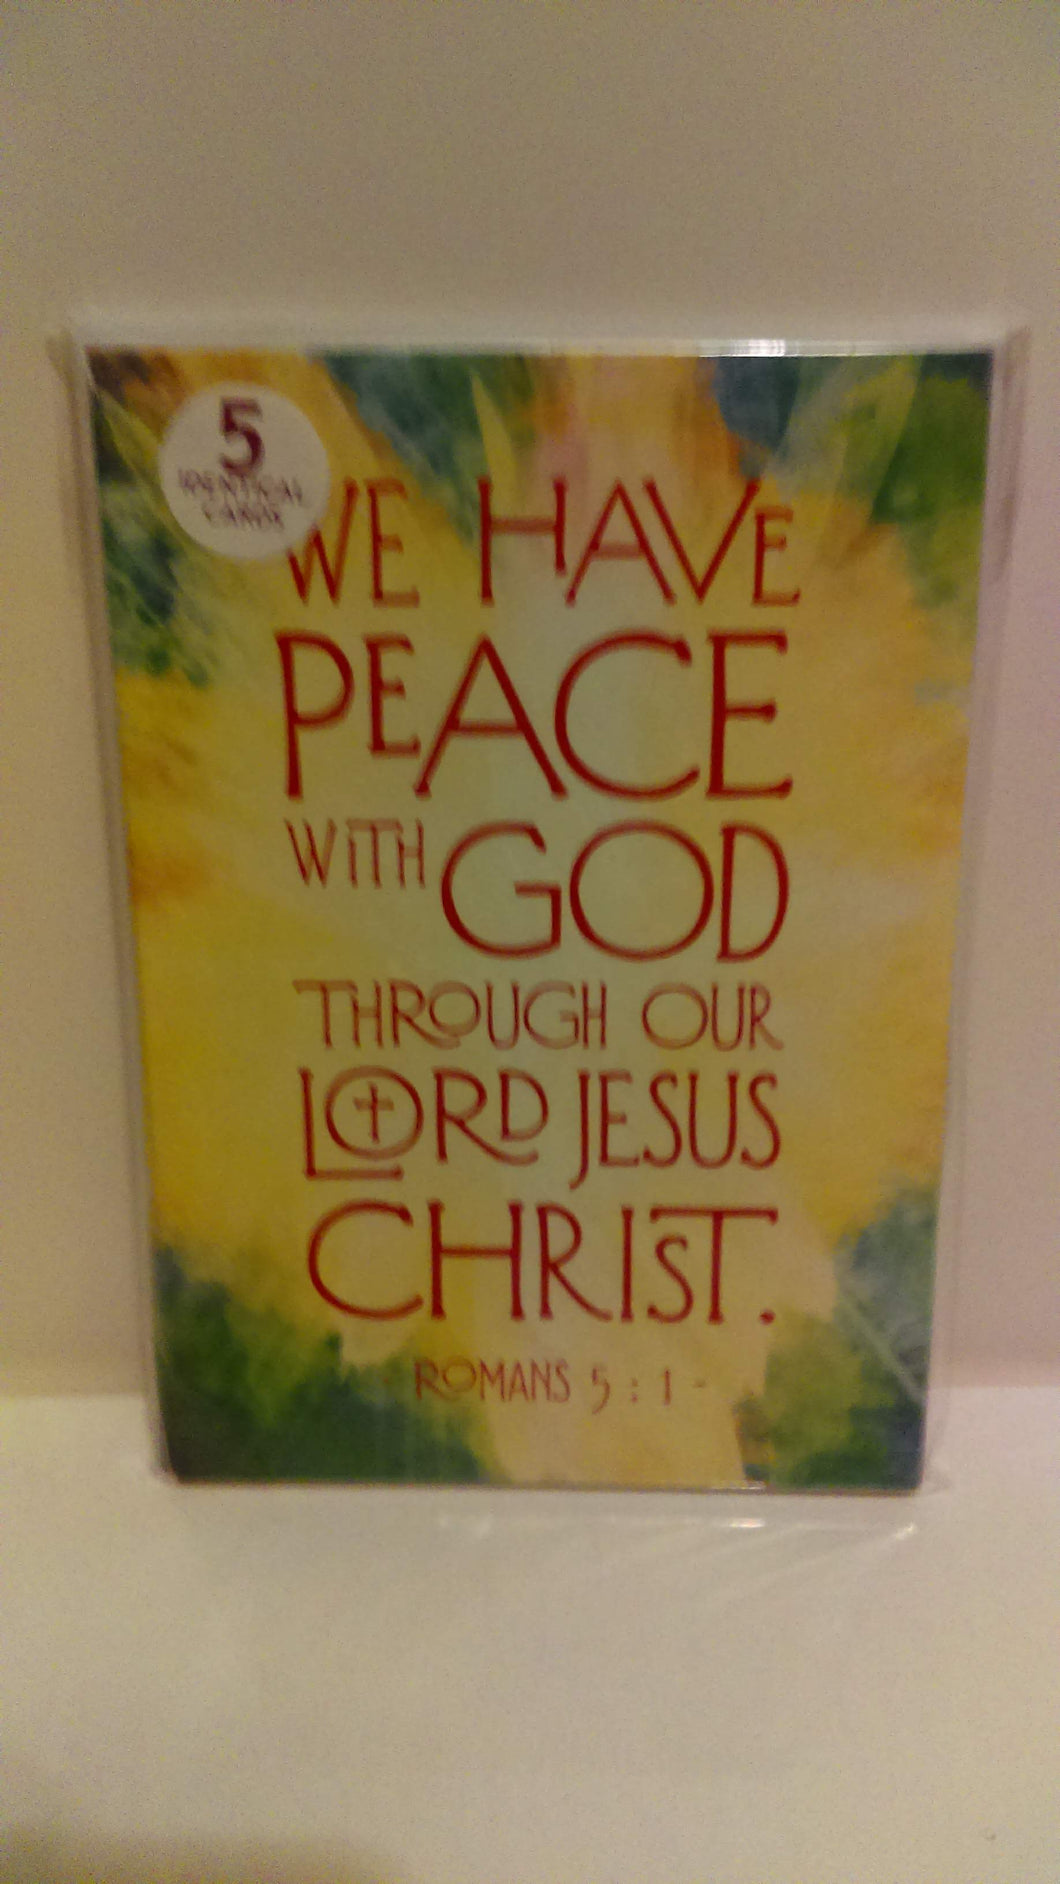 We have peace with God through our Lord Jesus Christ